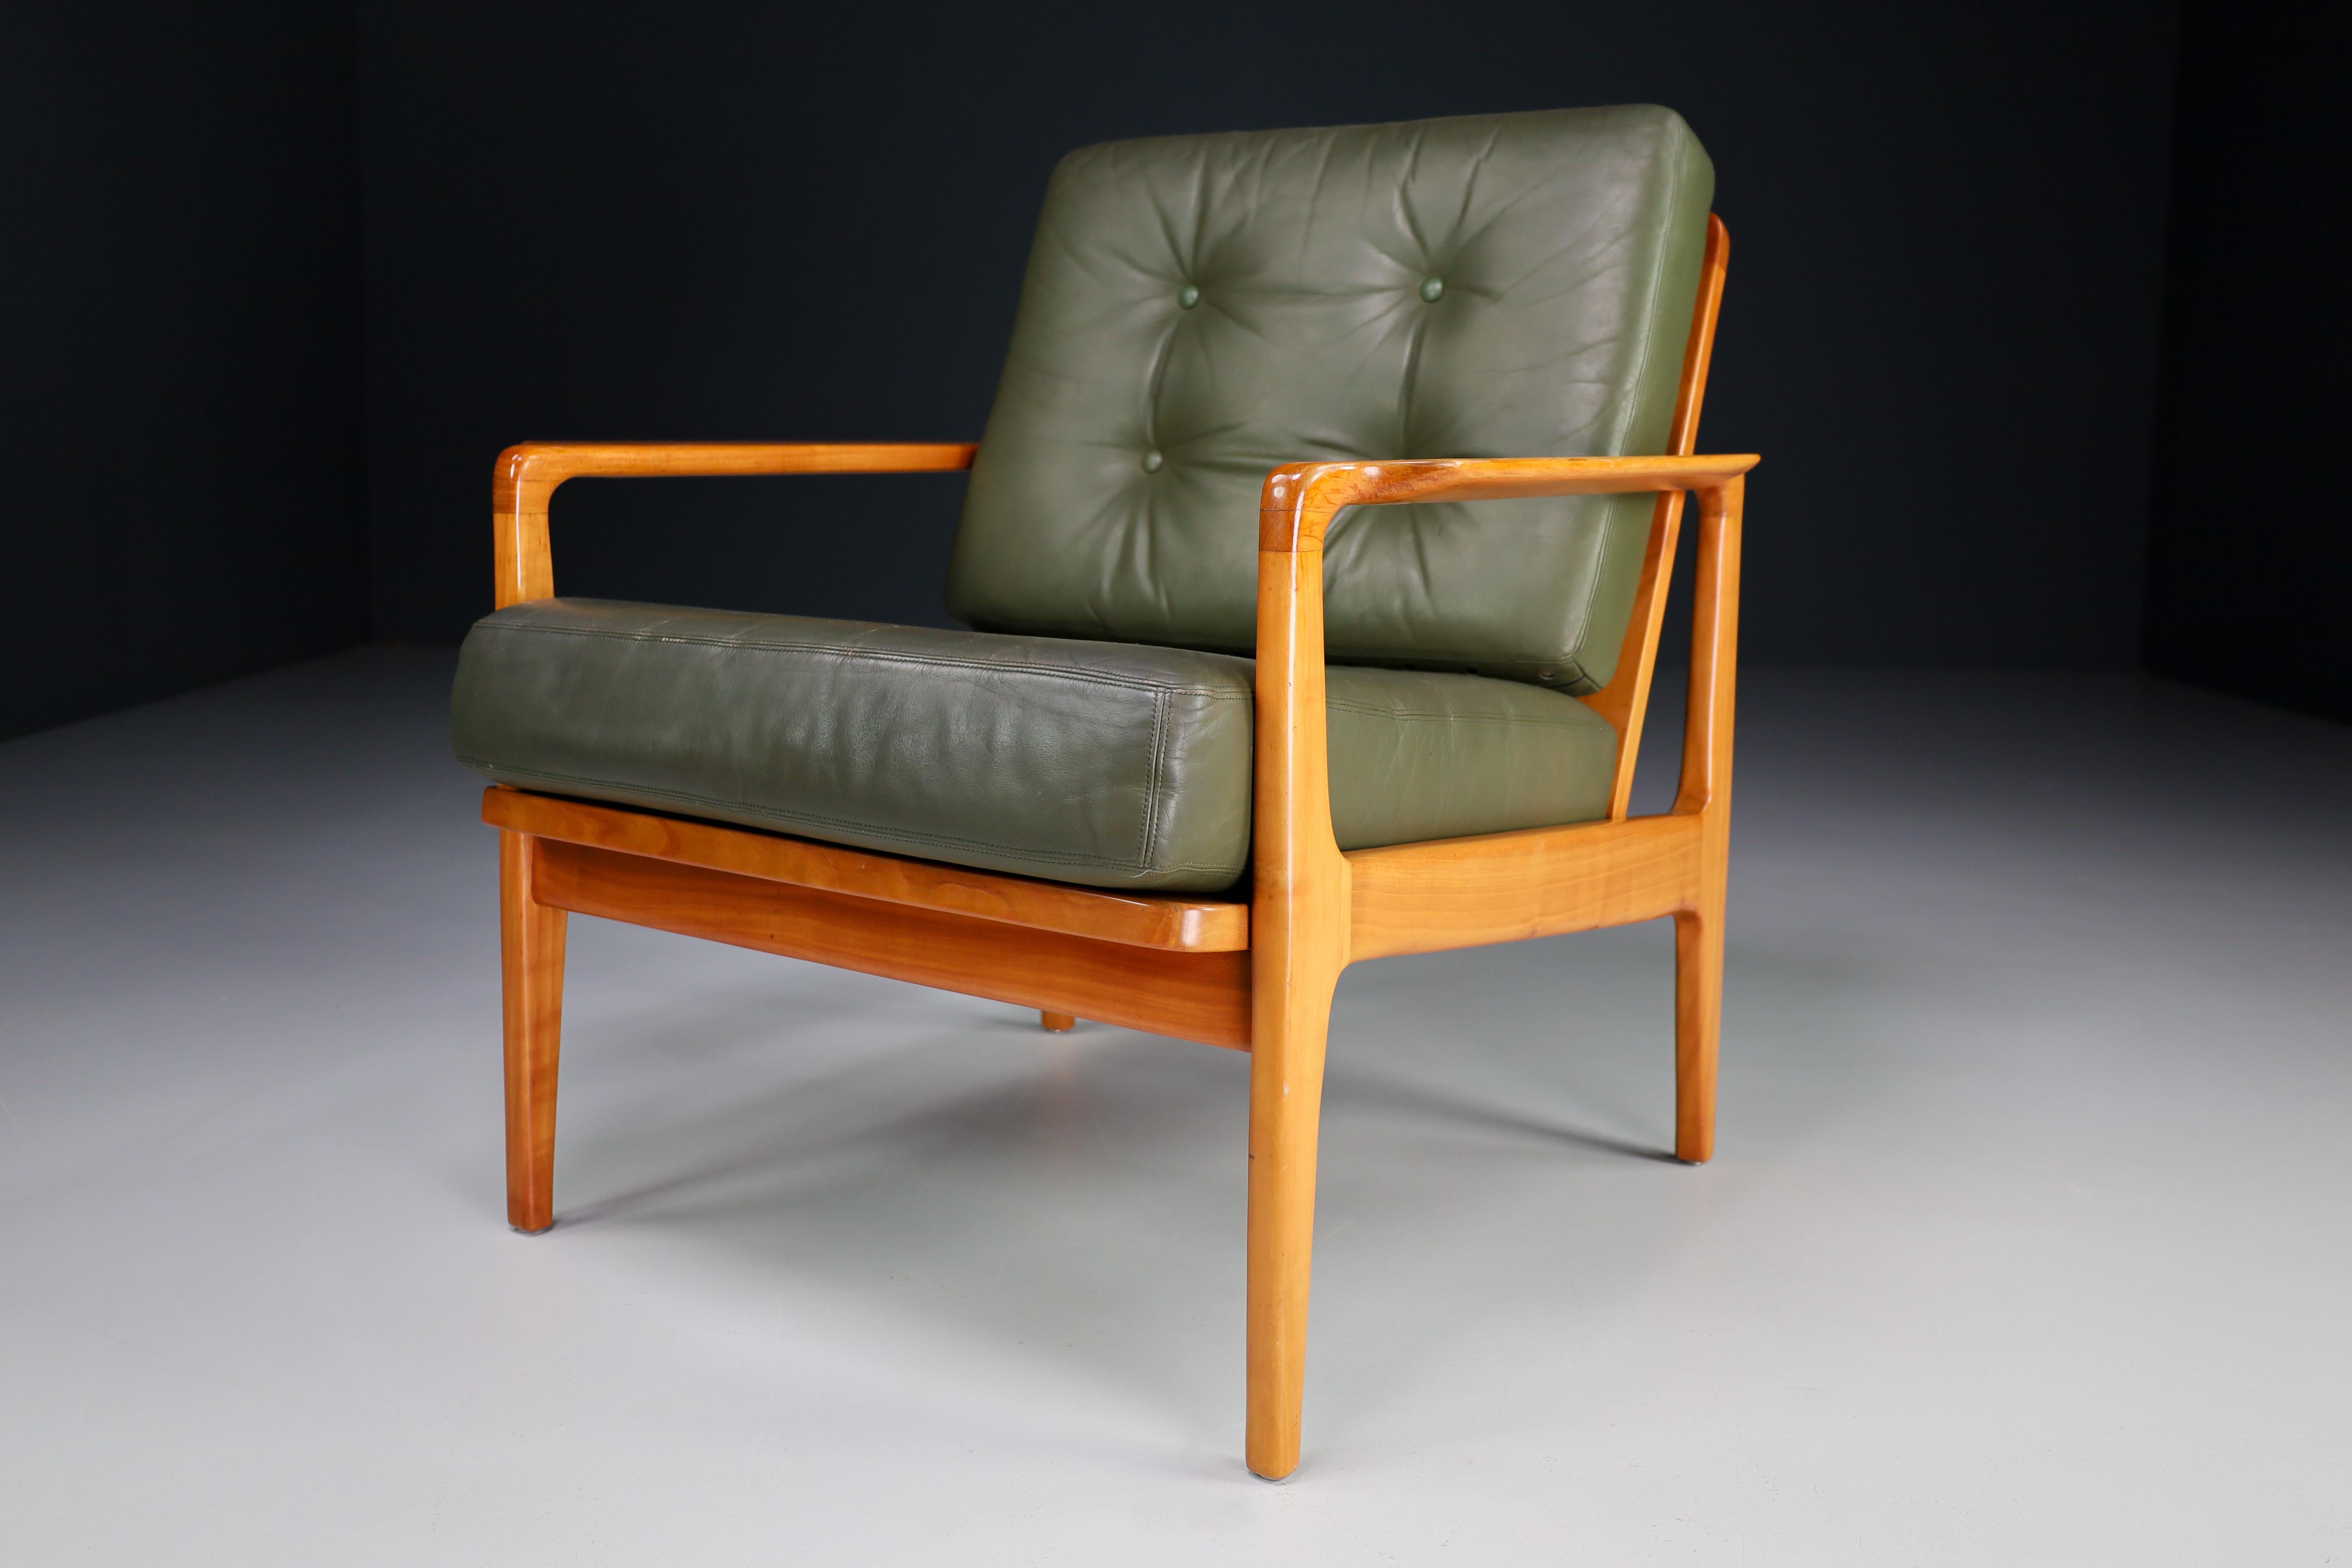 Midcentury Danish Lounge Chairs by Arne Wahl Iversen in Green Leather, 1960s For Sale 2